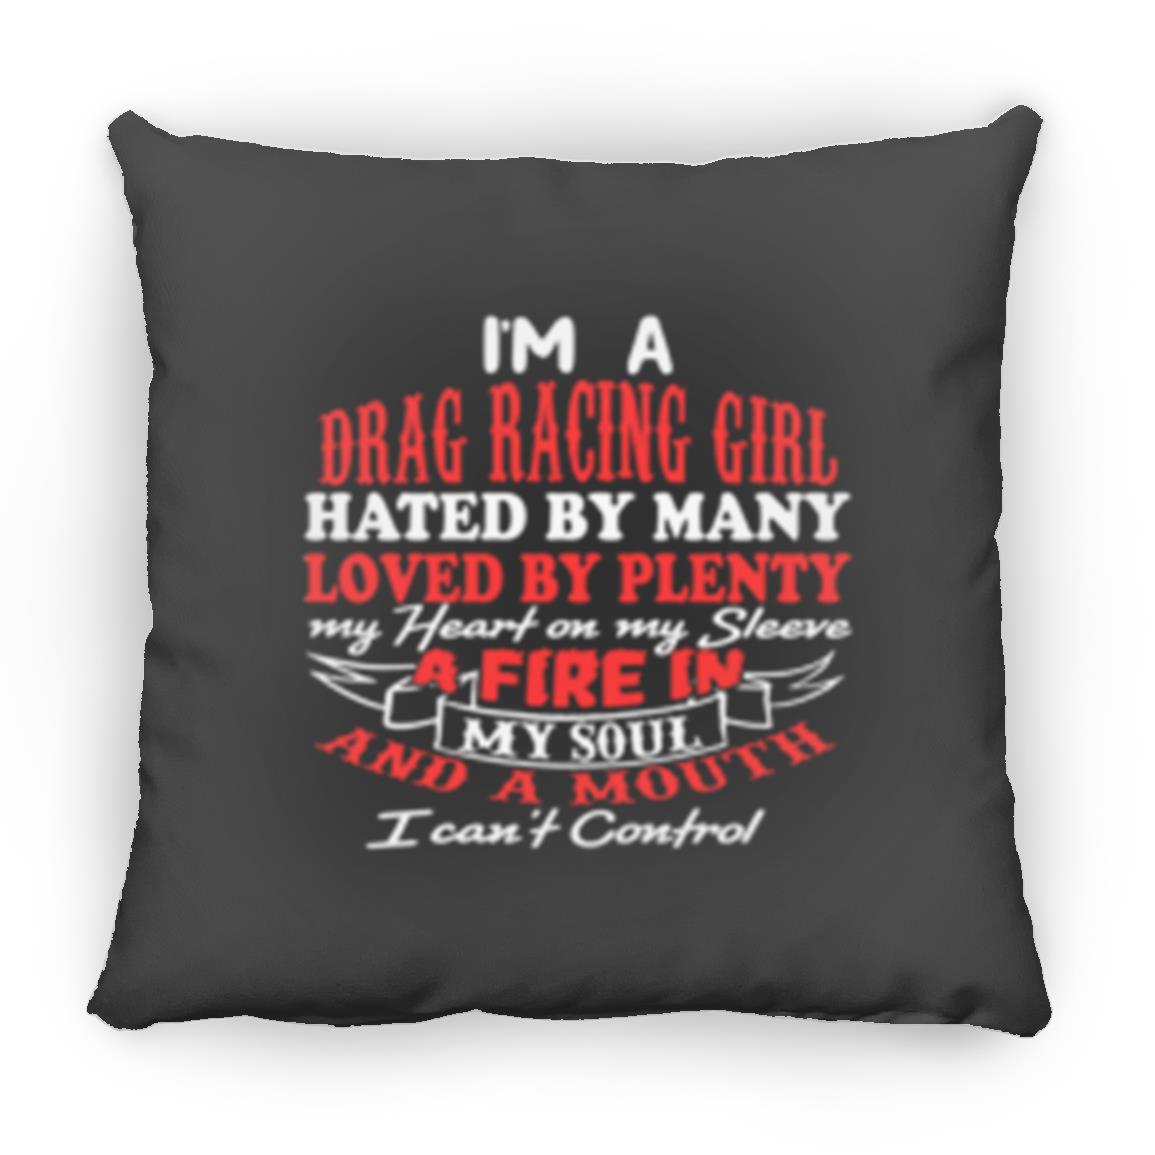 I'm A Drag Racing Girl Hated By Many Loved By Plenty Small Square Pillow